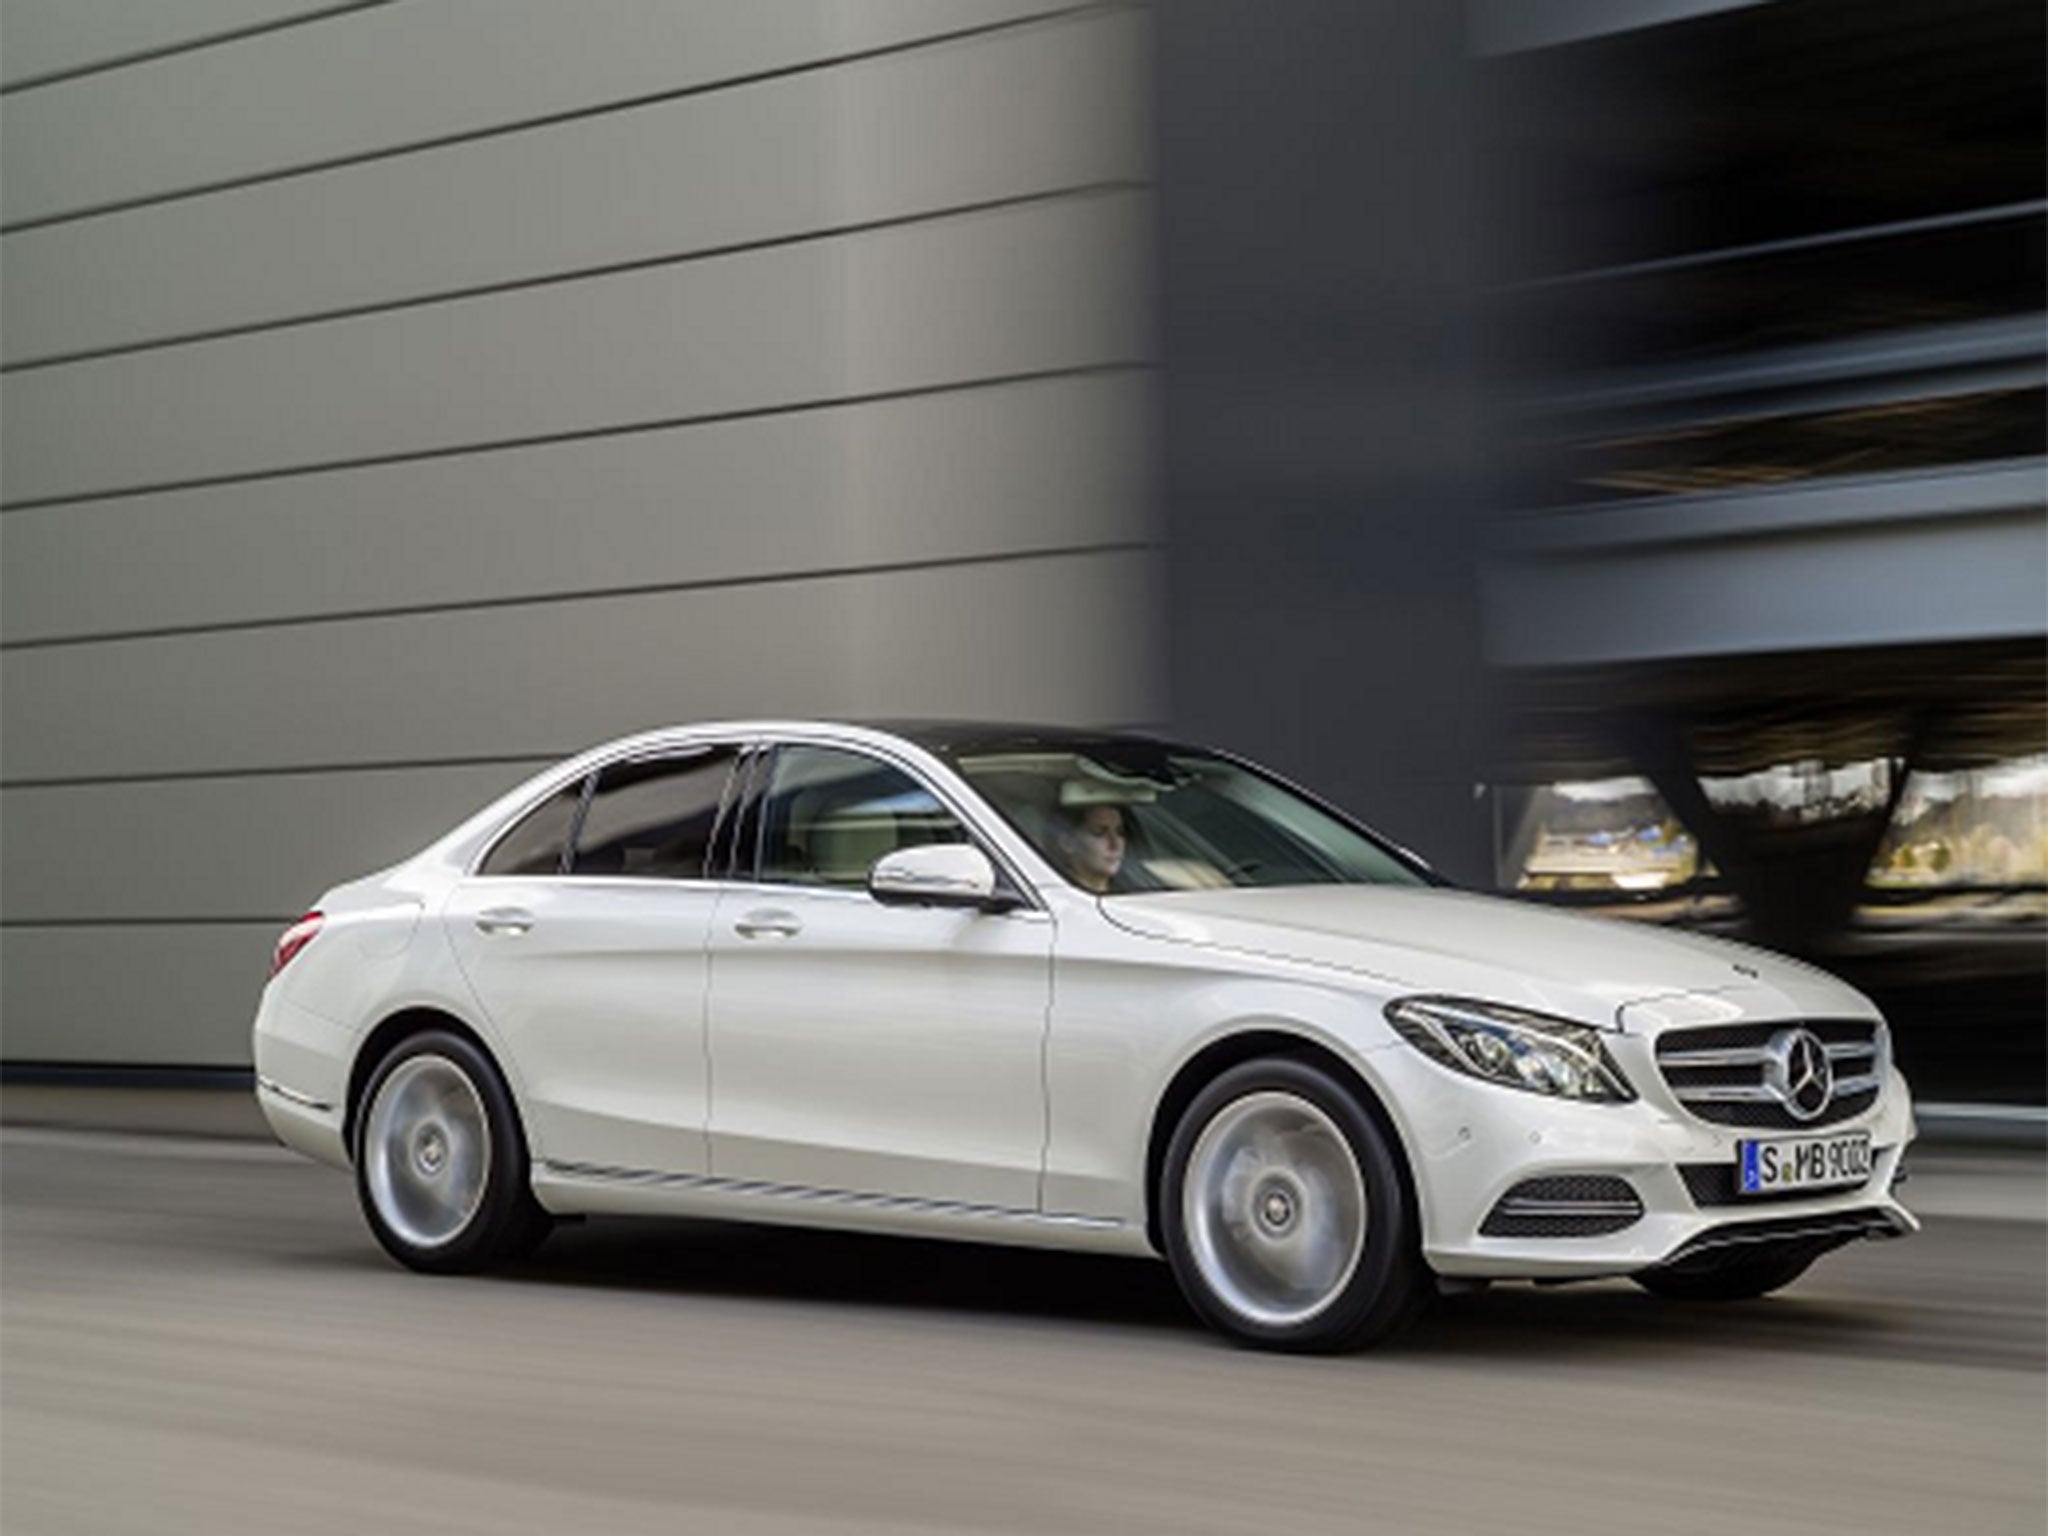 The Mercedes C-Class has just launched